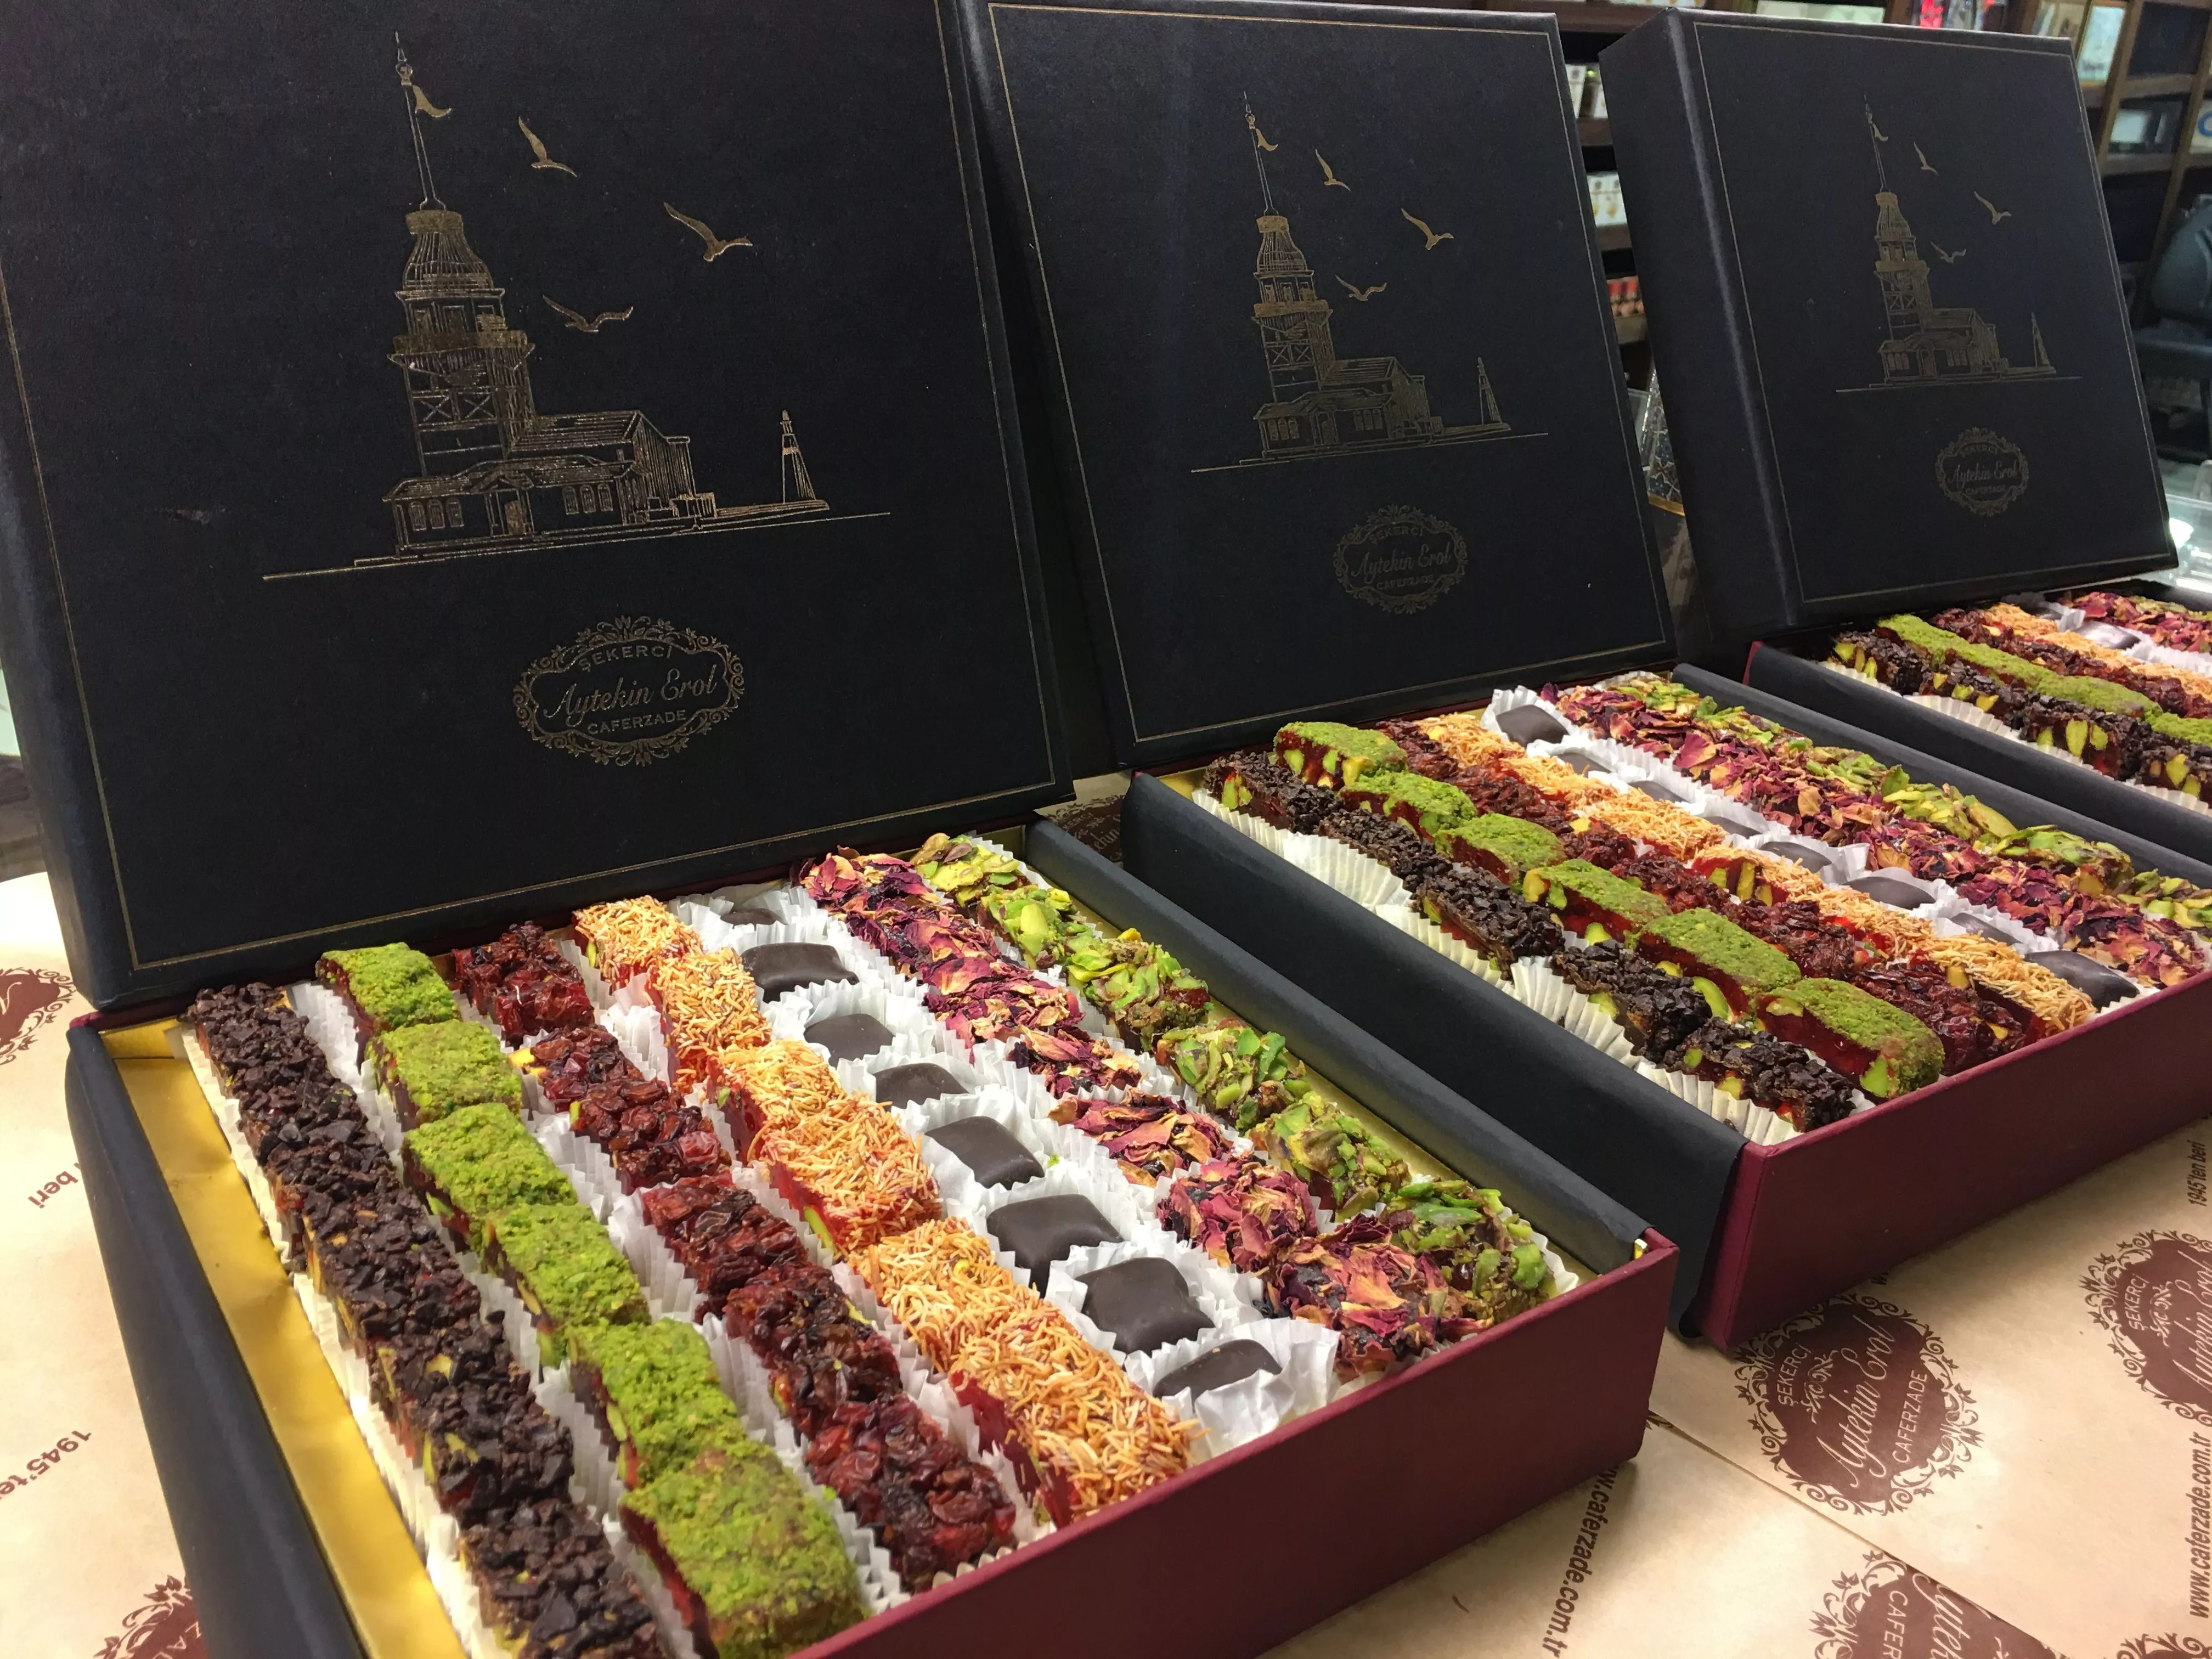 Confectioner Cafer Erol in Turkey, central_asia | Baked Goods,Sweets - Country Helper